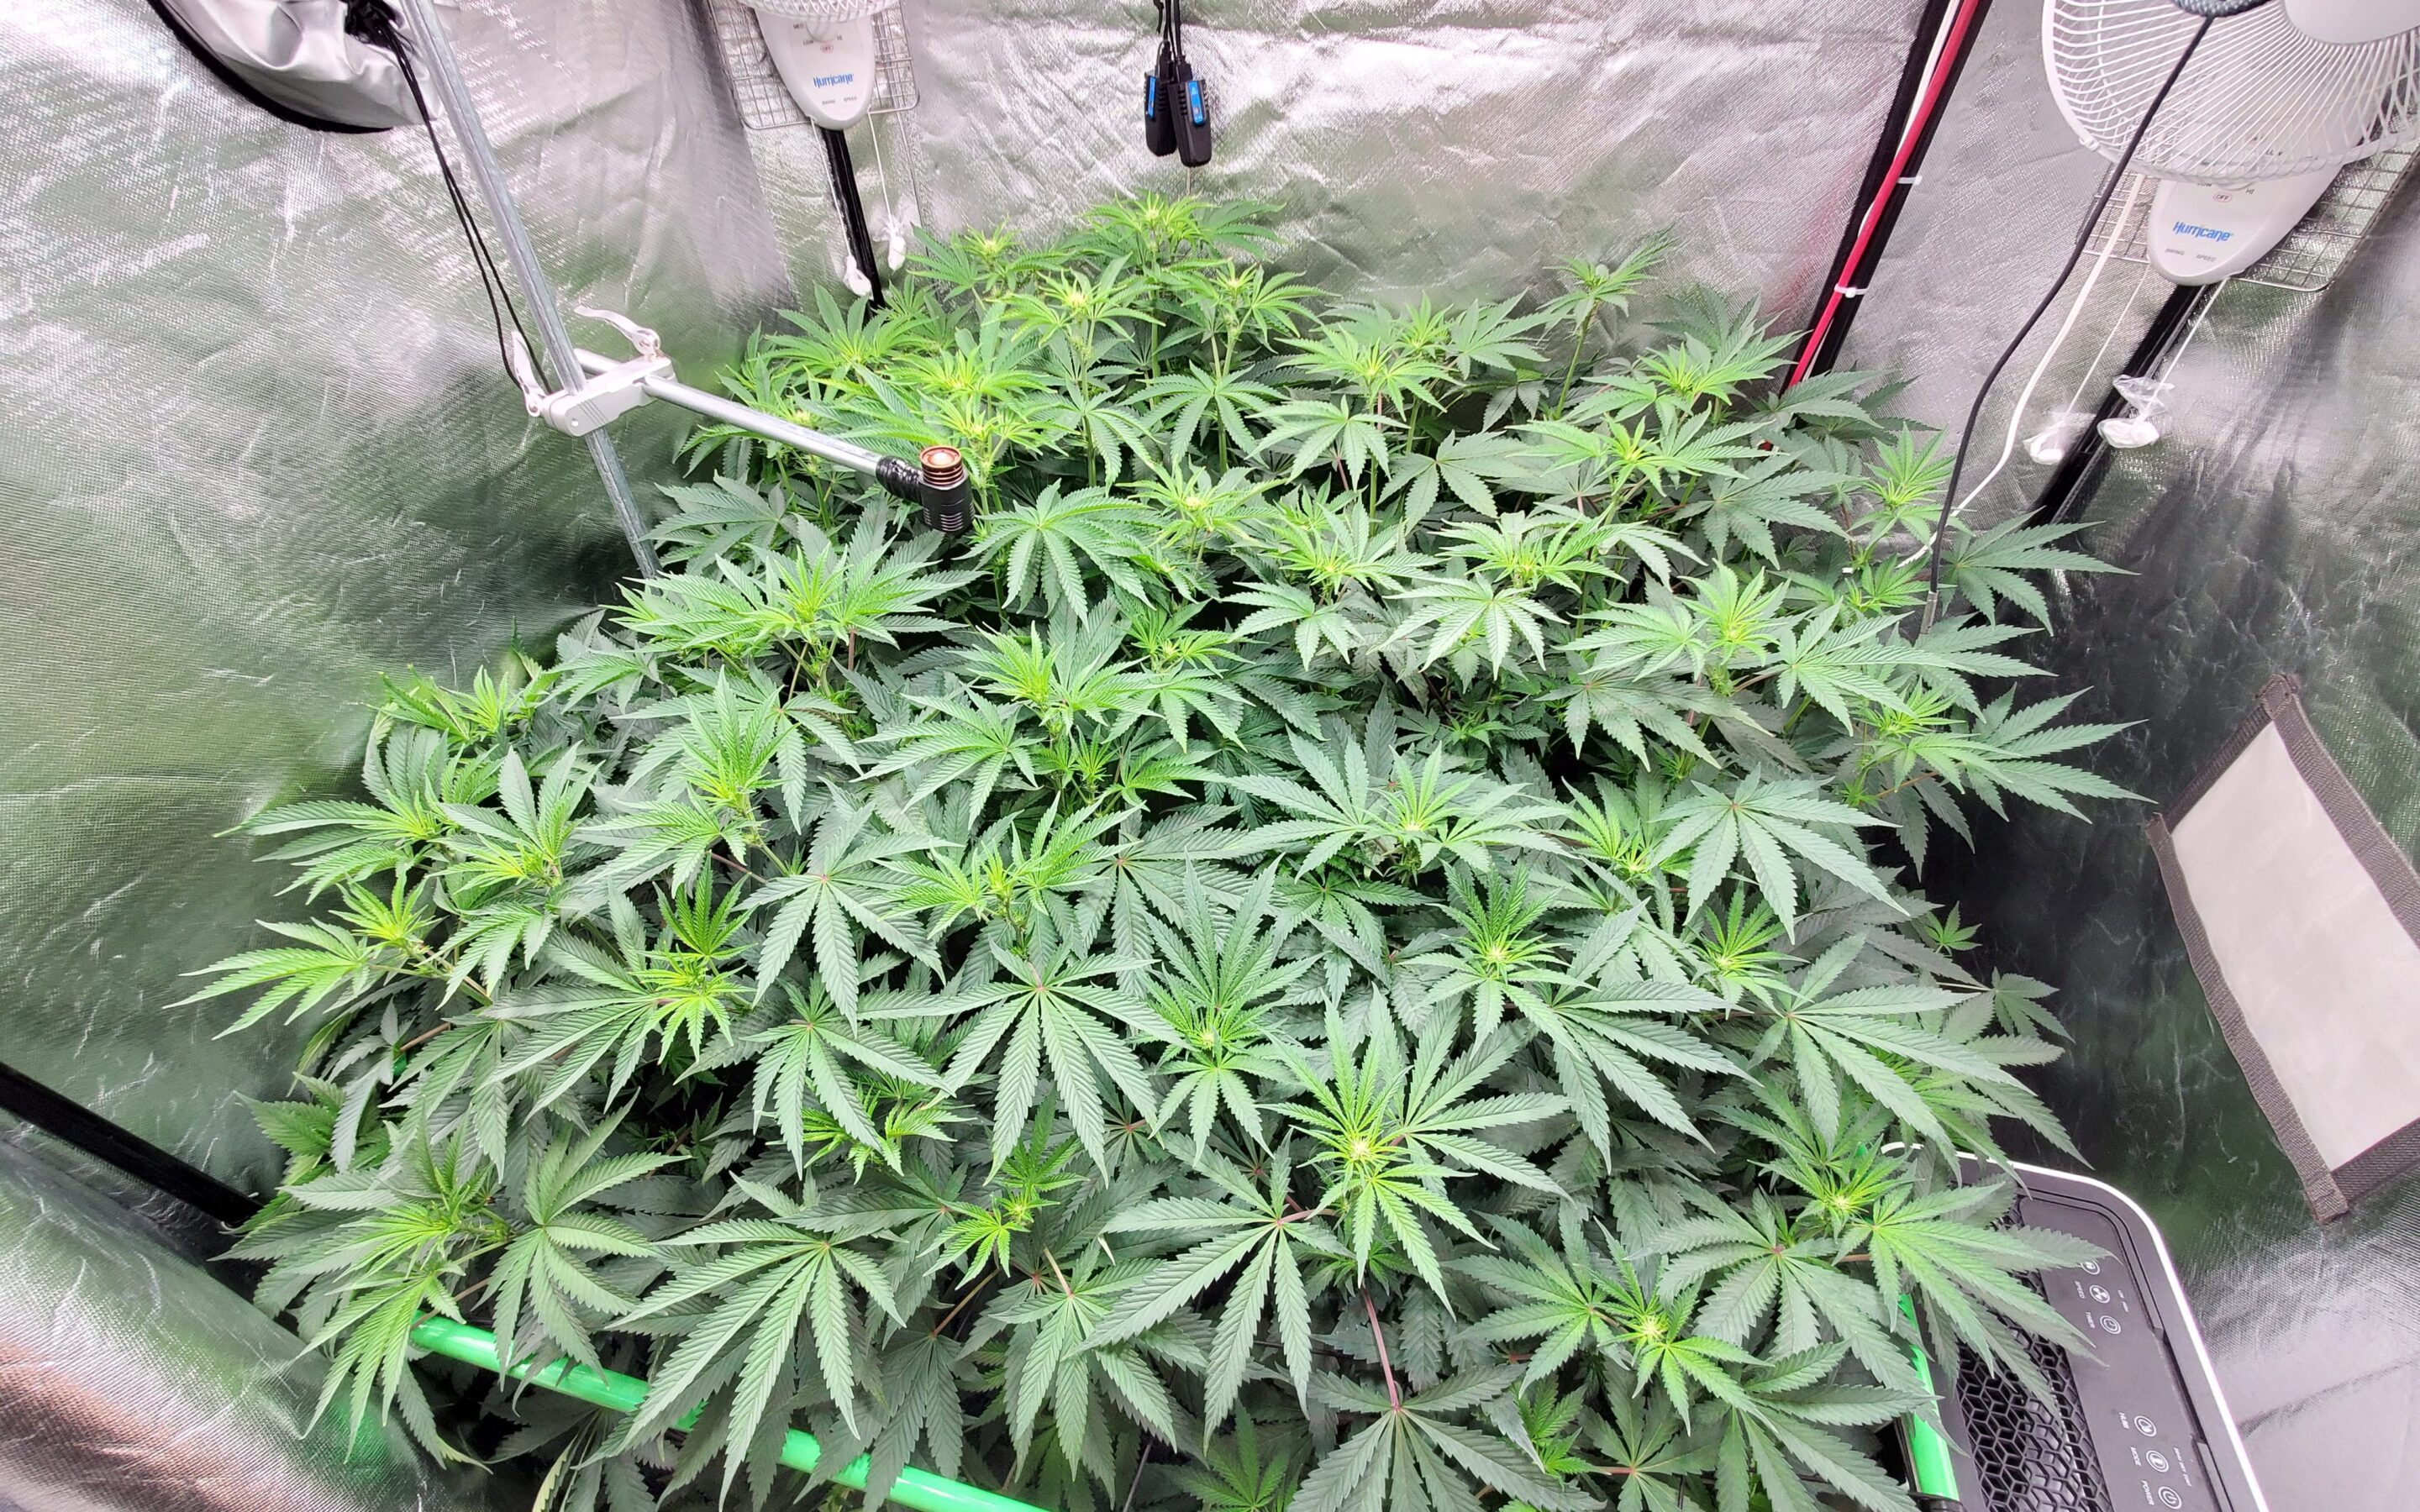 Rare RDWC grower joins!